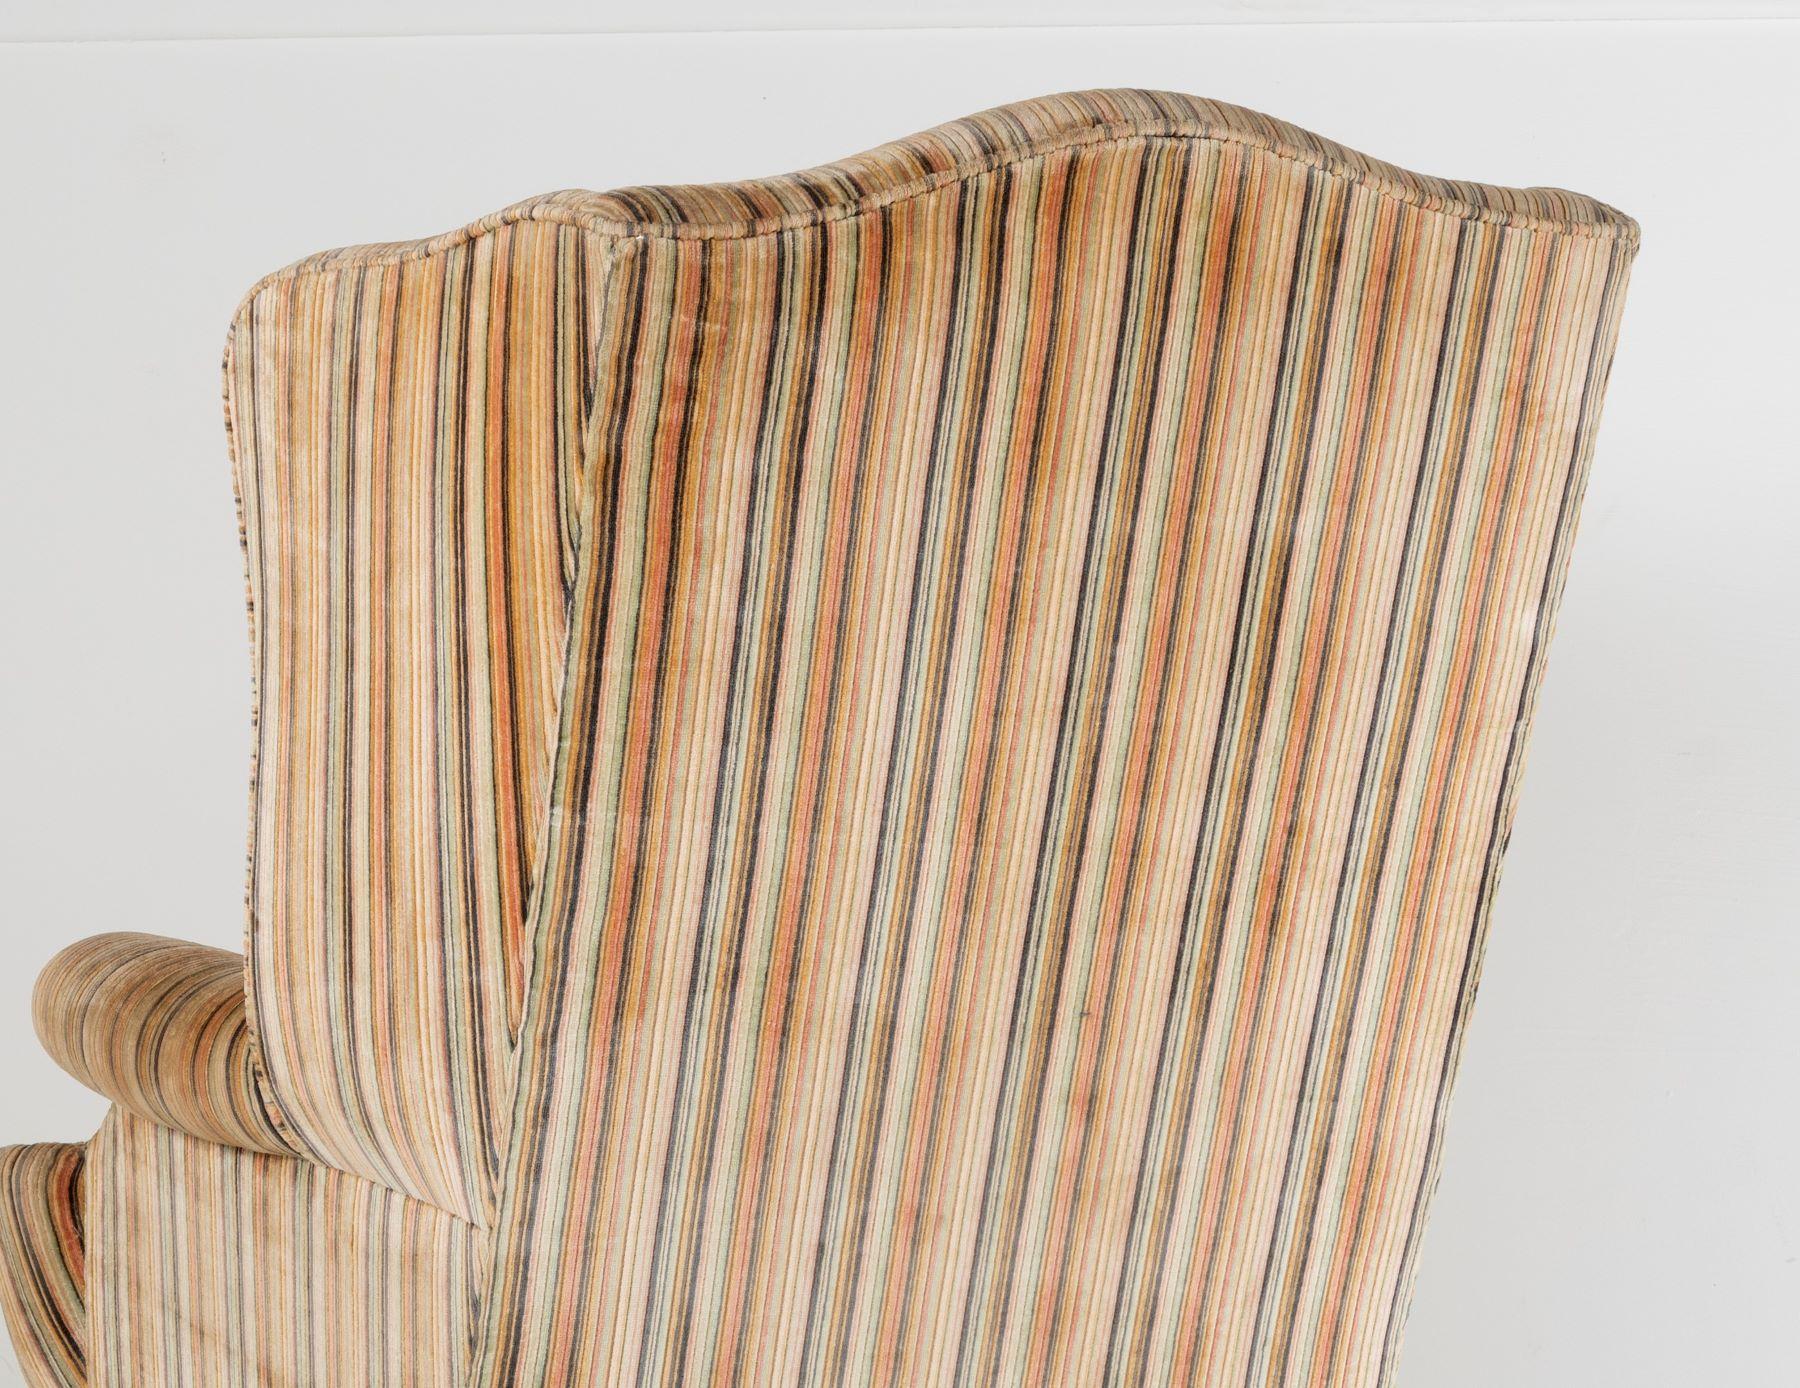 Stylish George III Style Wing Back Armchair in Original Striped Upholstery For Sale 2